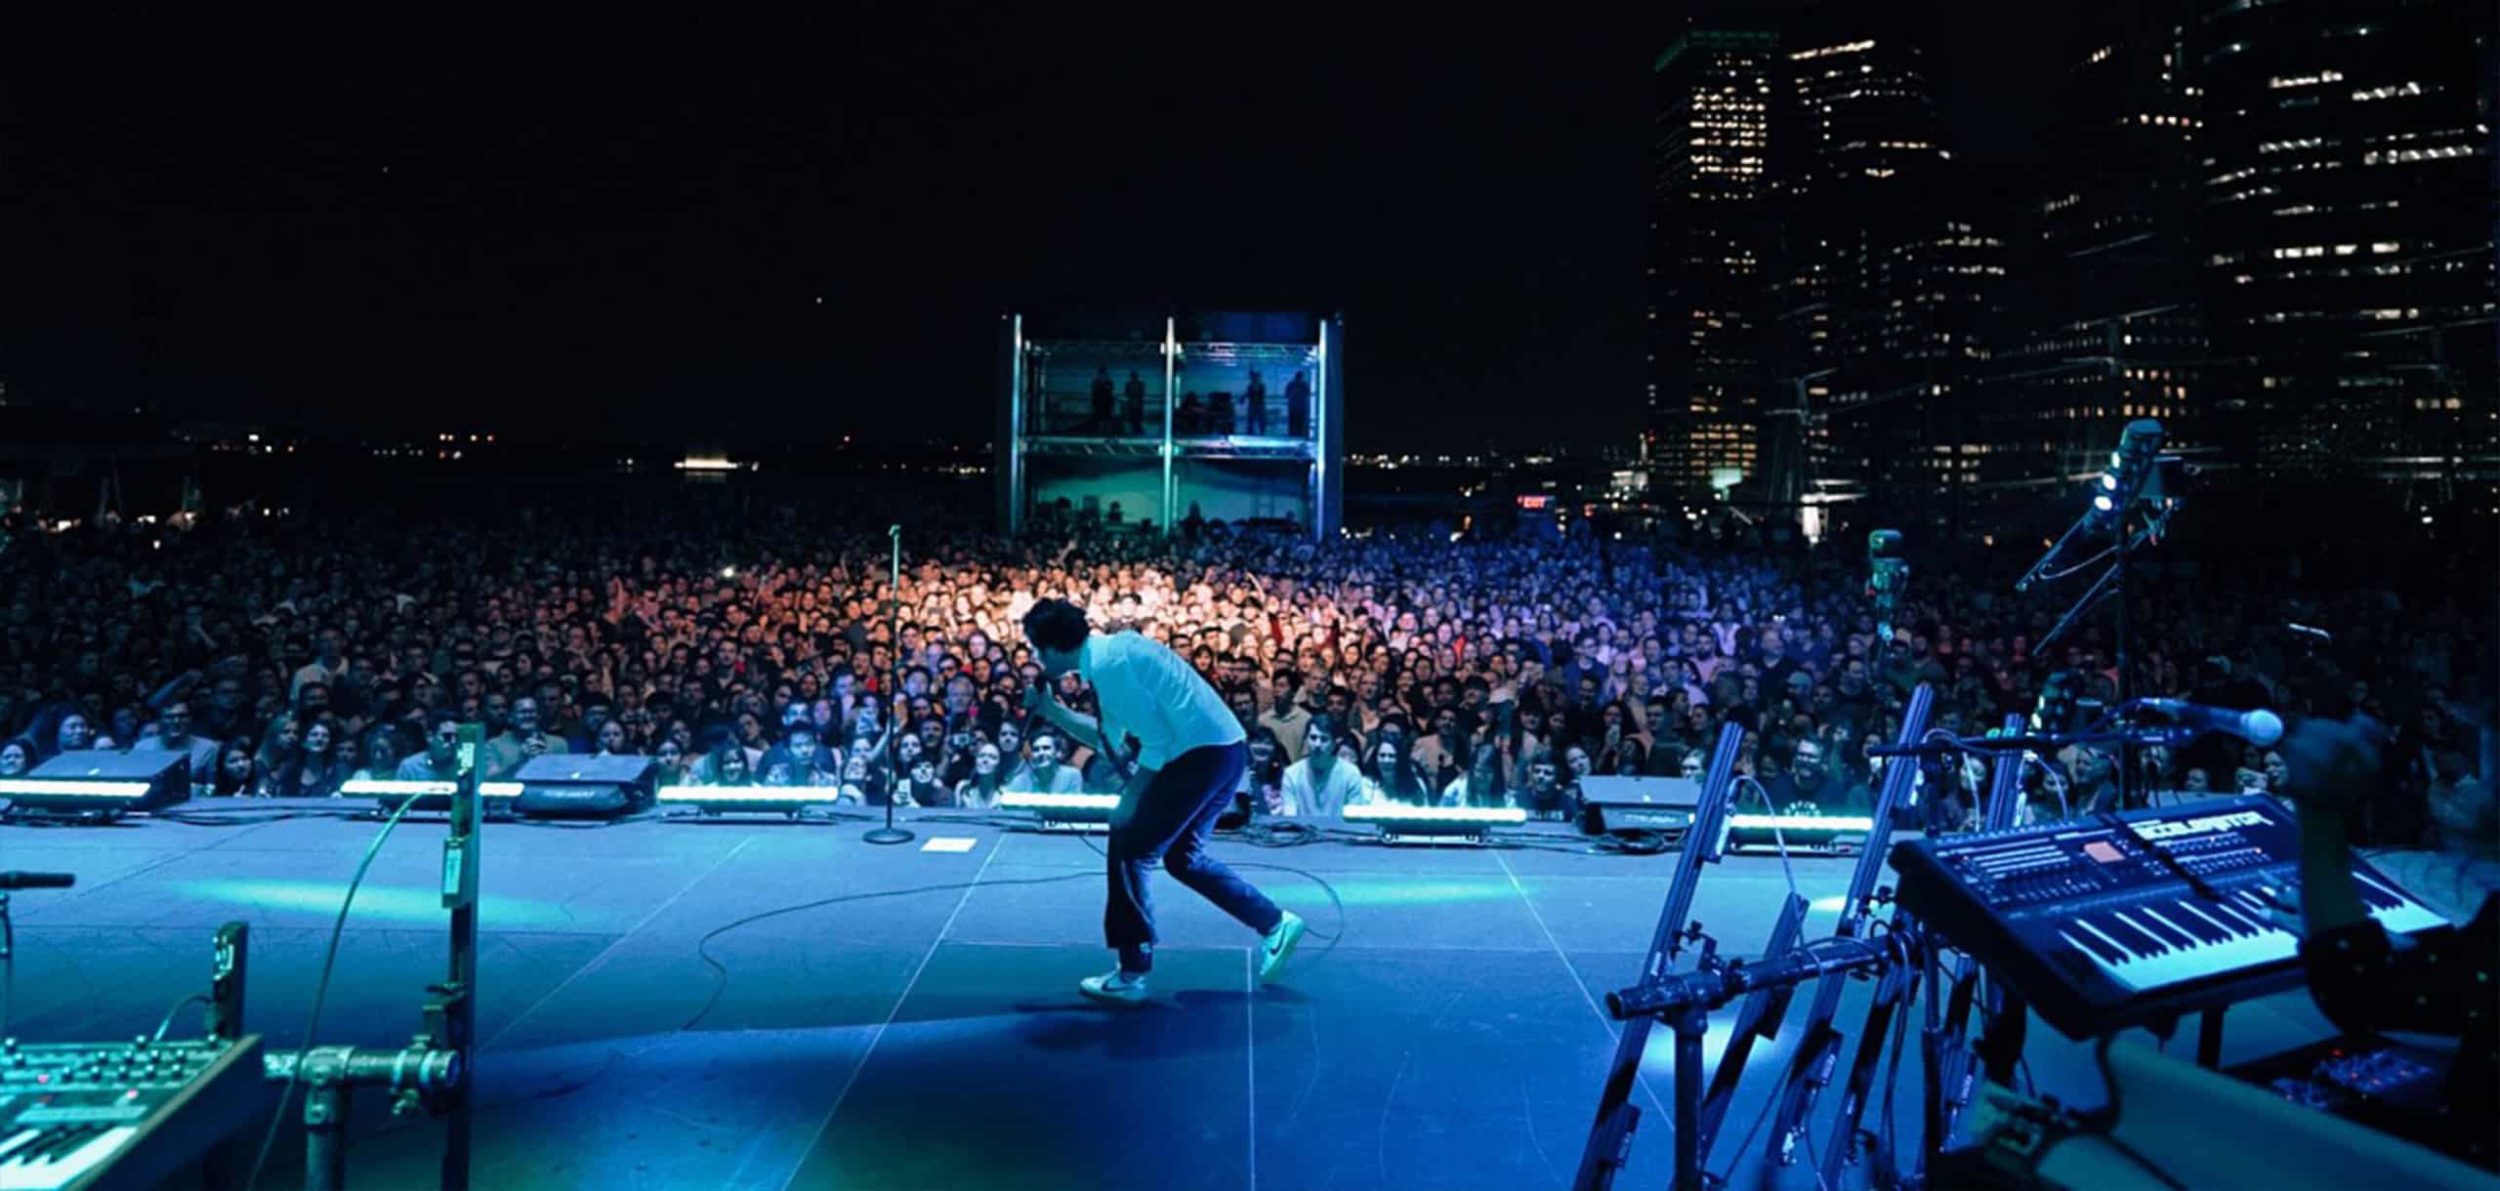 Passion Pit performing at Pier 17